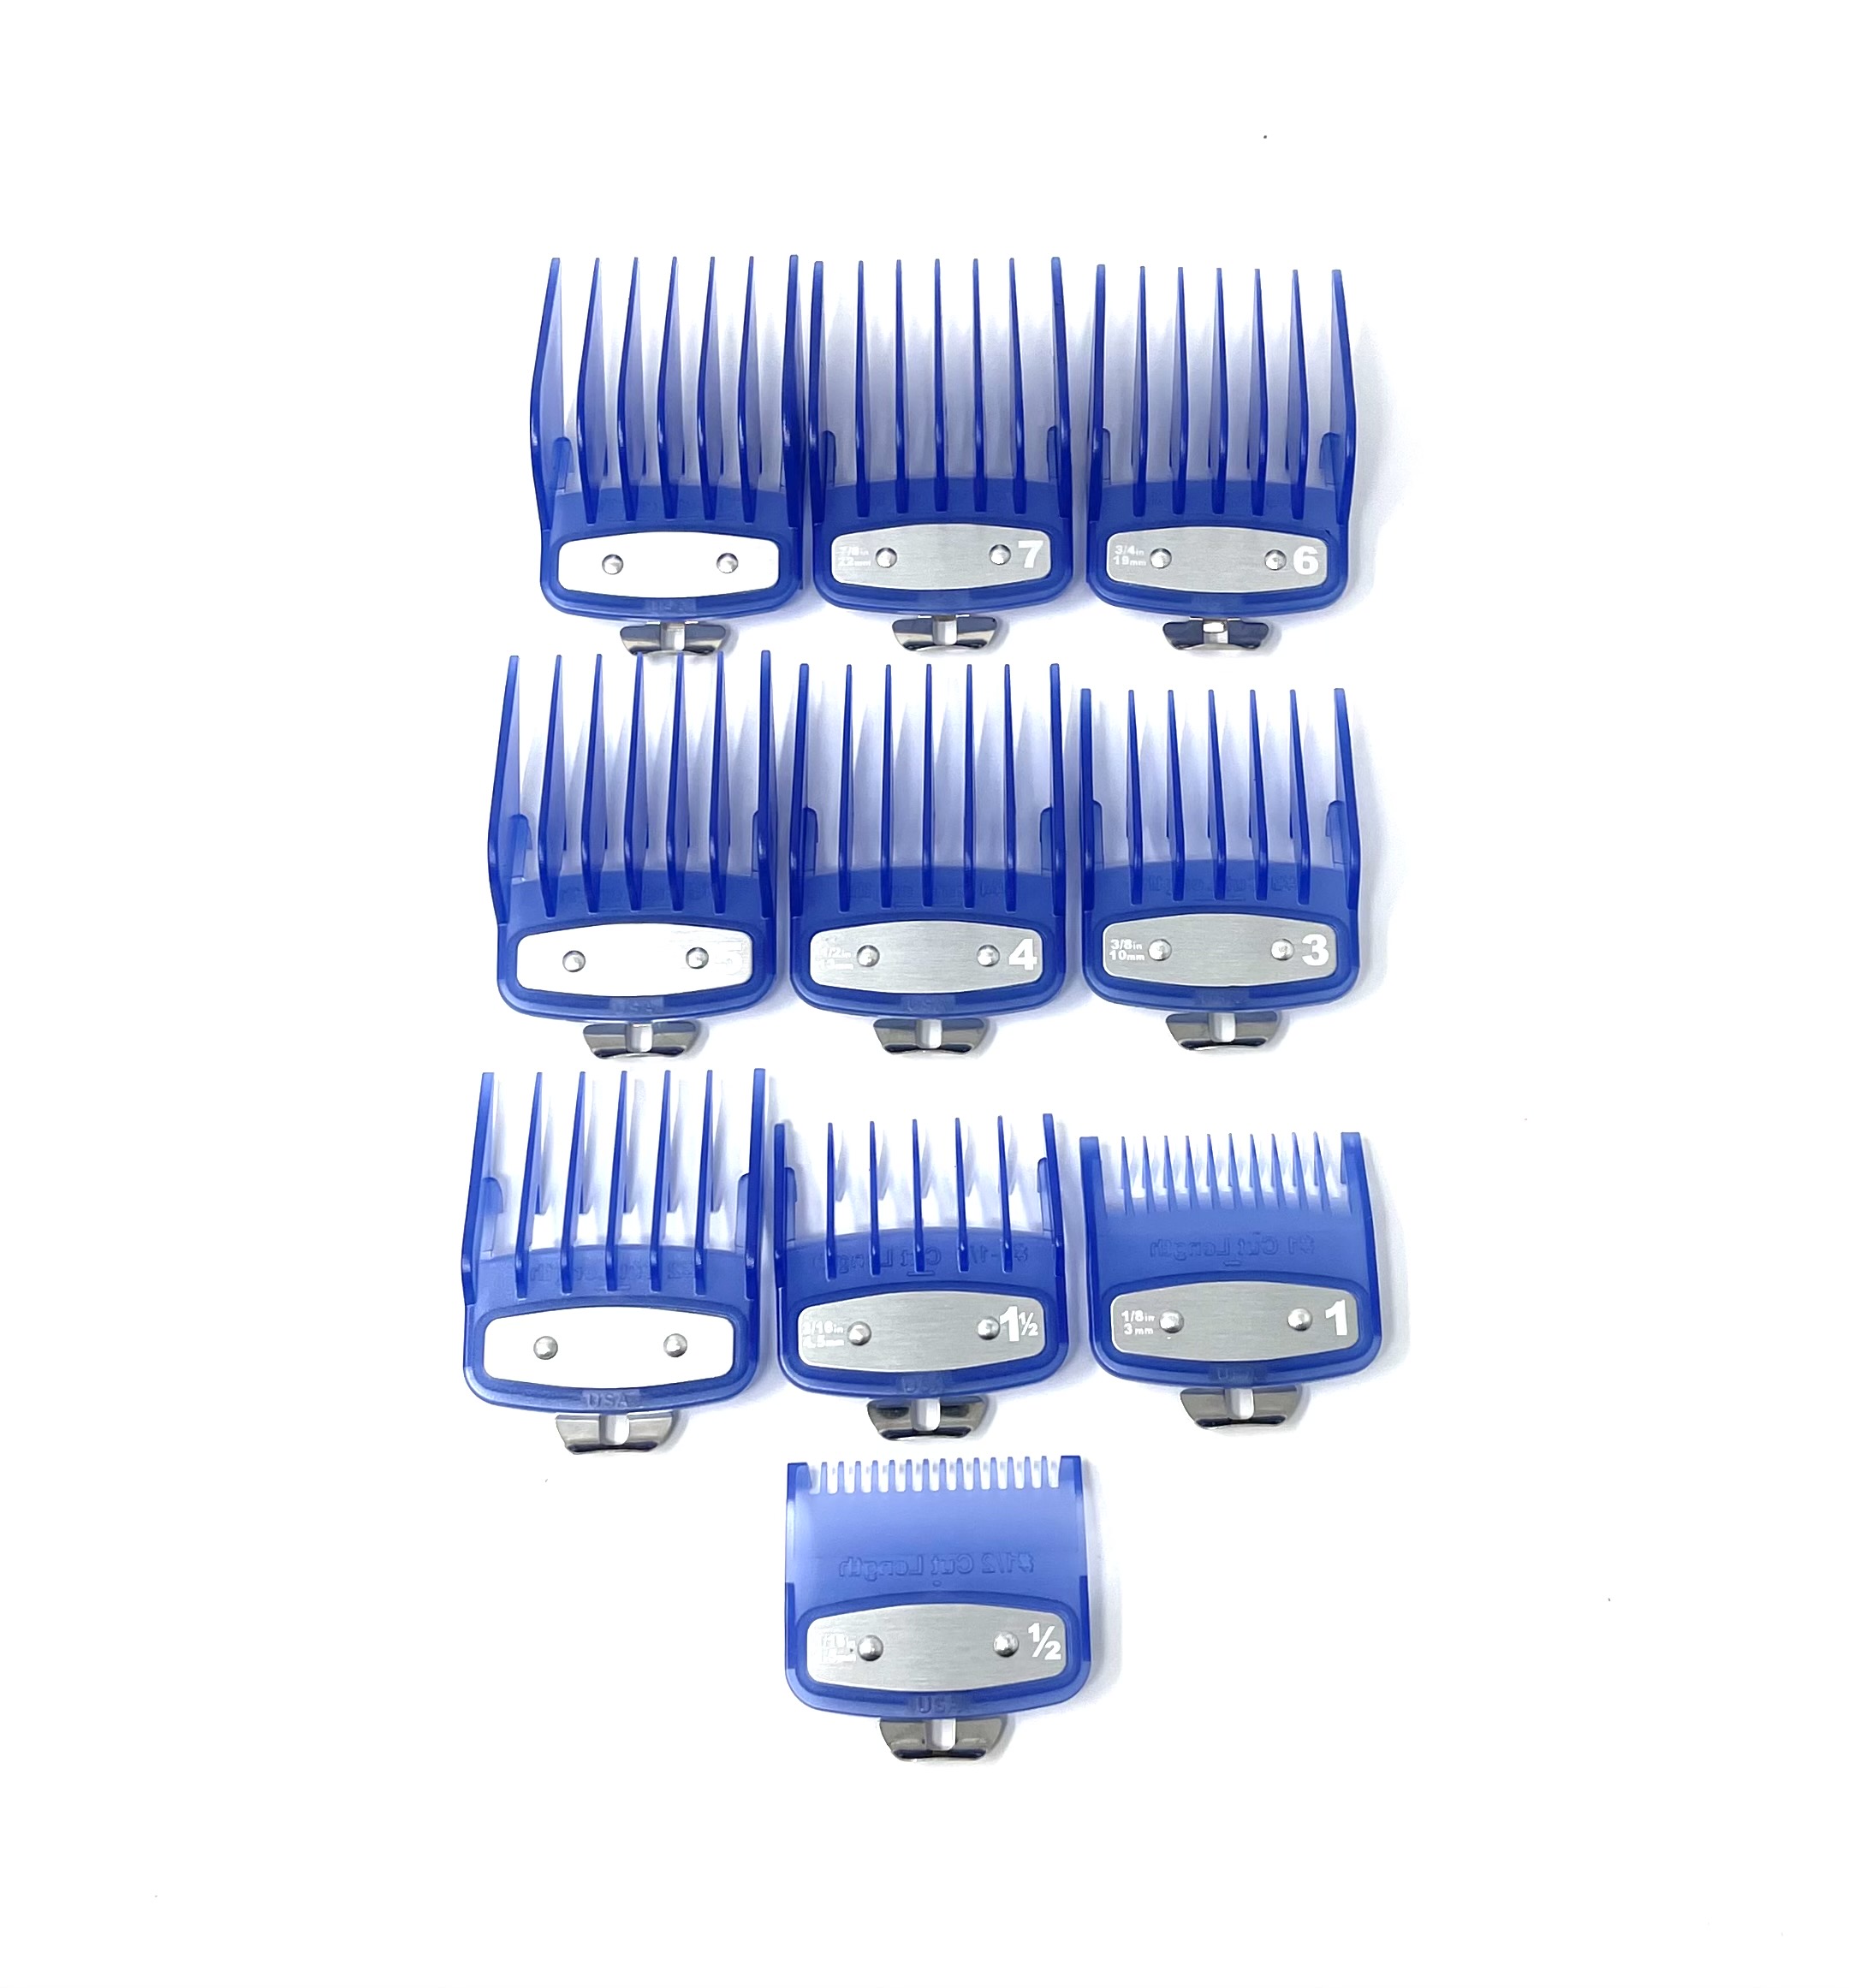 Blue Clear Clipper Premium Guards set with metal clip - fits wahl and babyliss (10pc = 1-8